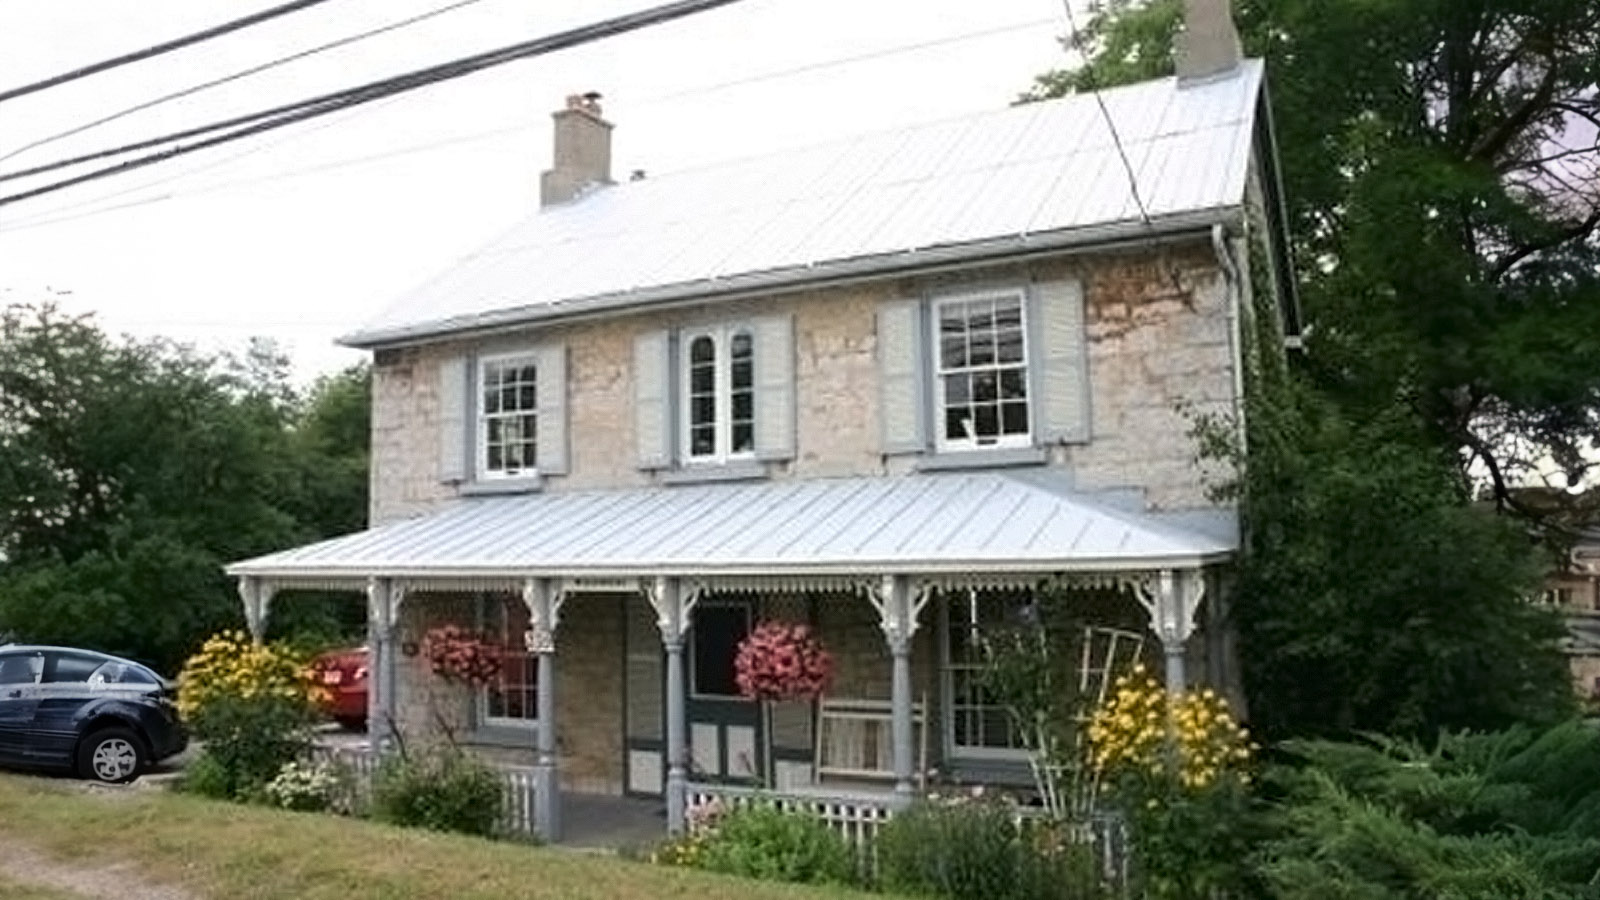 Historic two-story stone house.